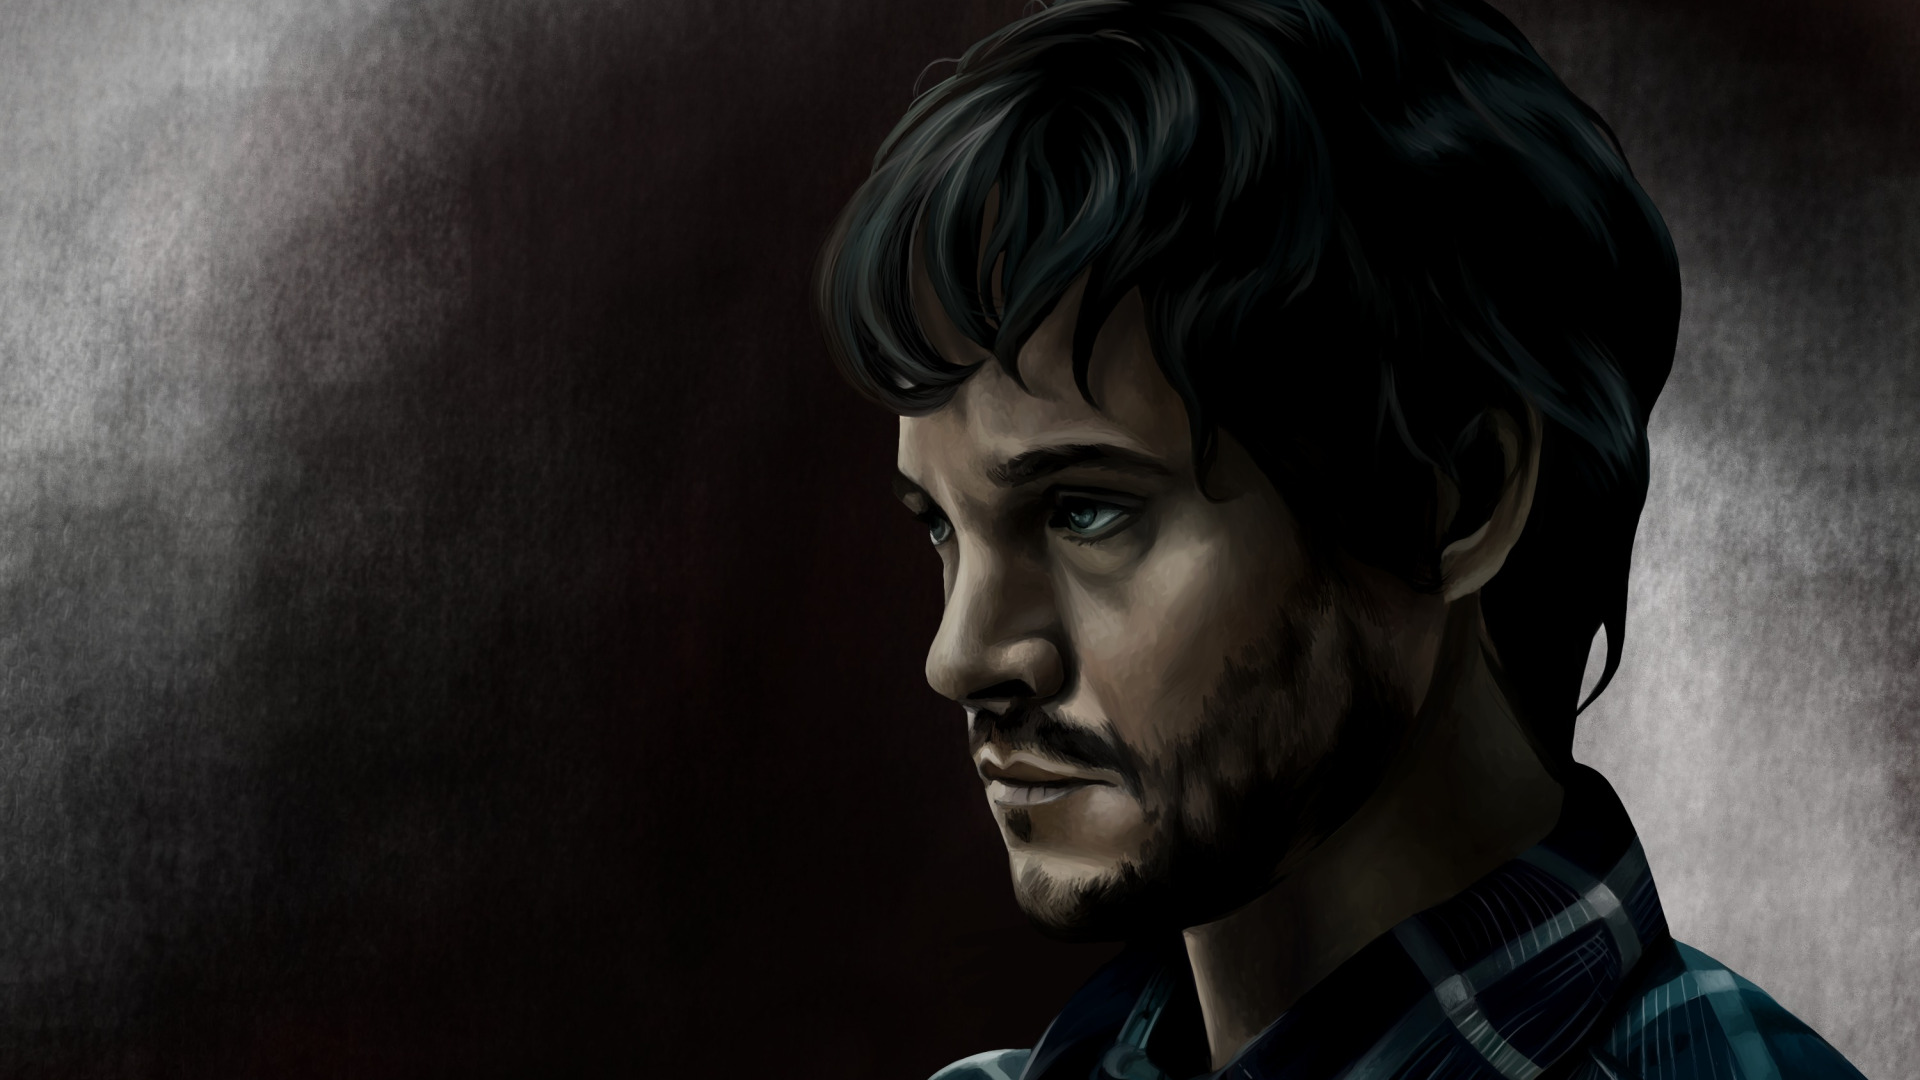 Download wallpaper the series, art, Will Graham, Hannibal, Hannibal, NBC,  Will Graham, section films in resolution 1920x1080